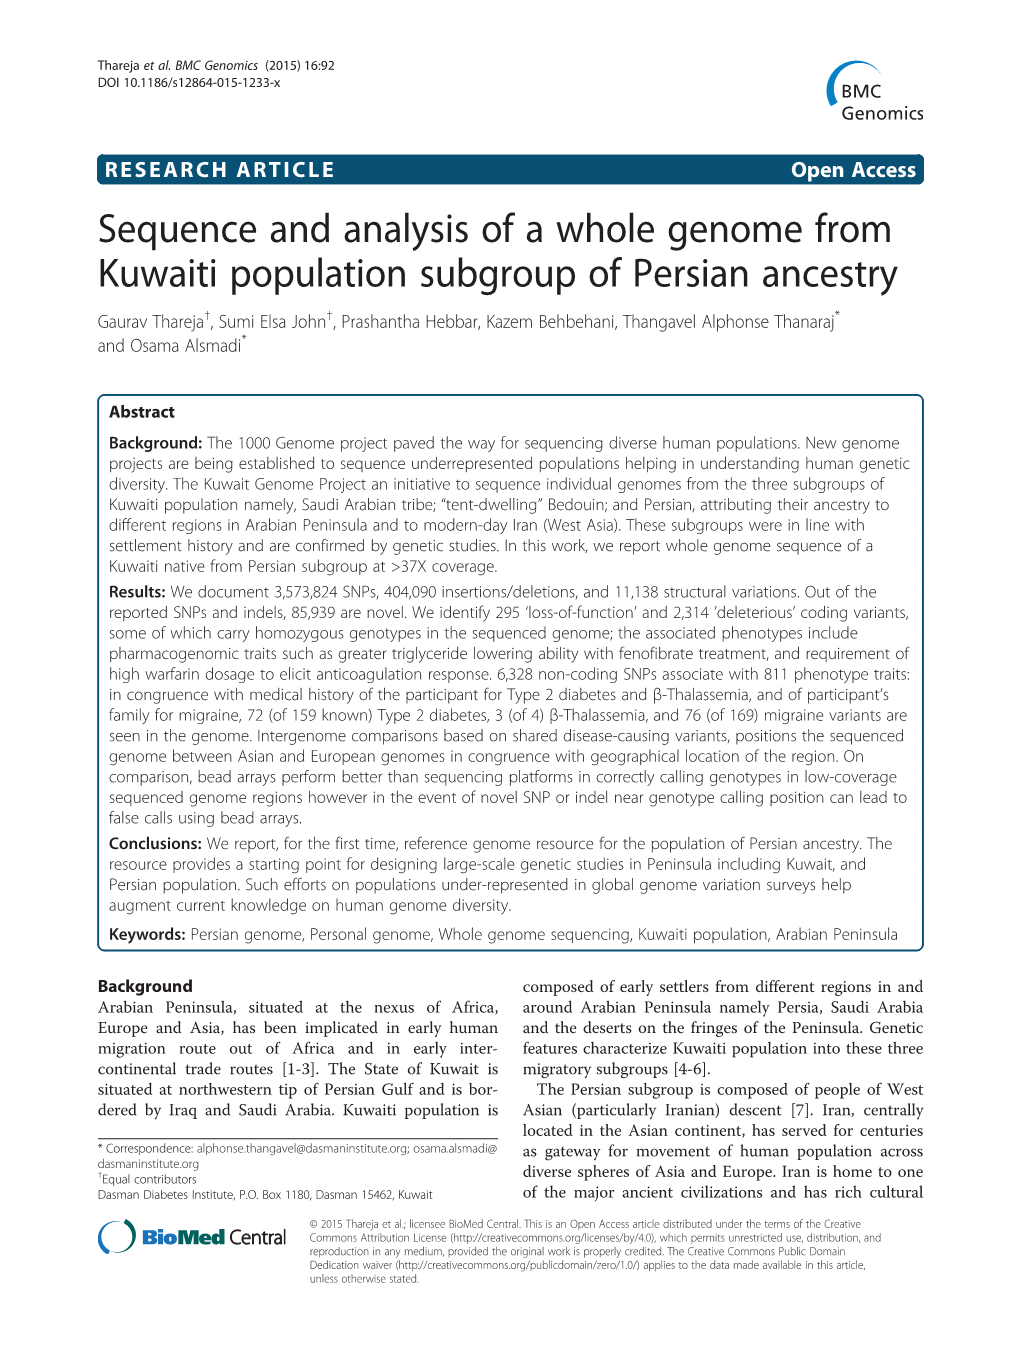 Sequence and Analysis of a Whole Genome from Kuwaiti Population Subgroup of Persian Ancestry